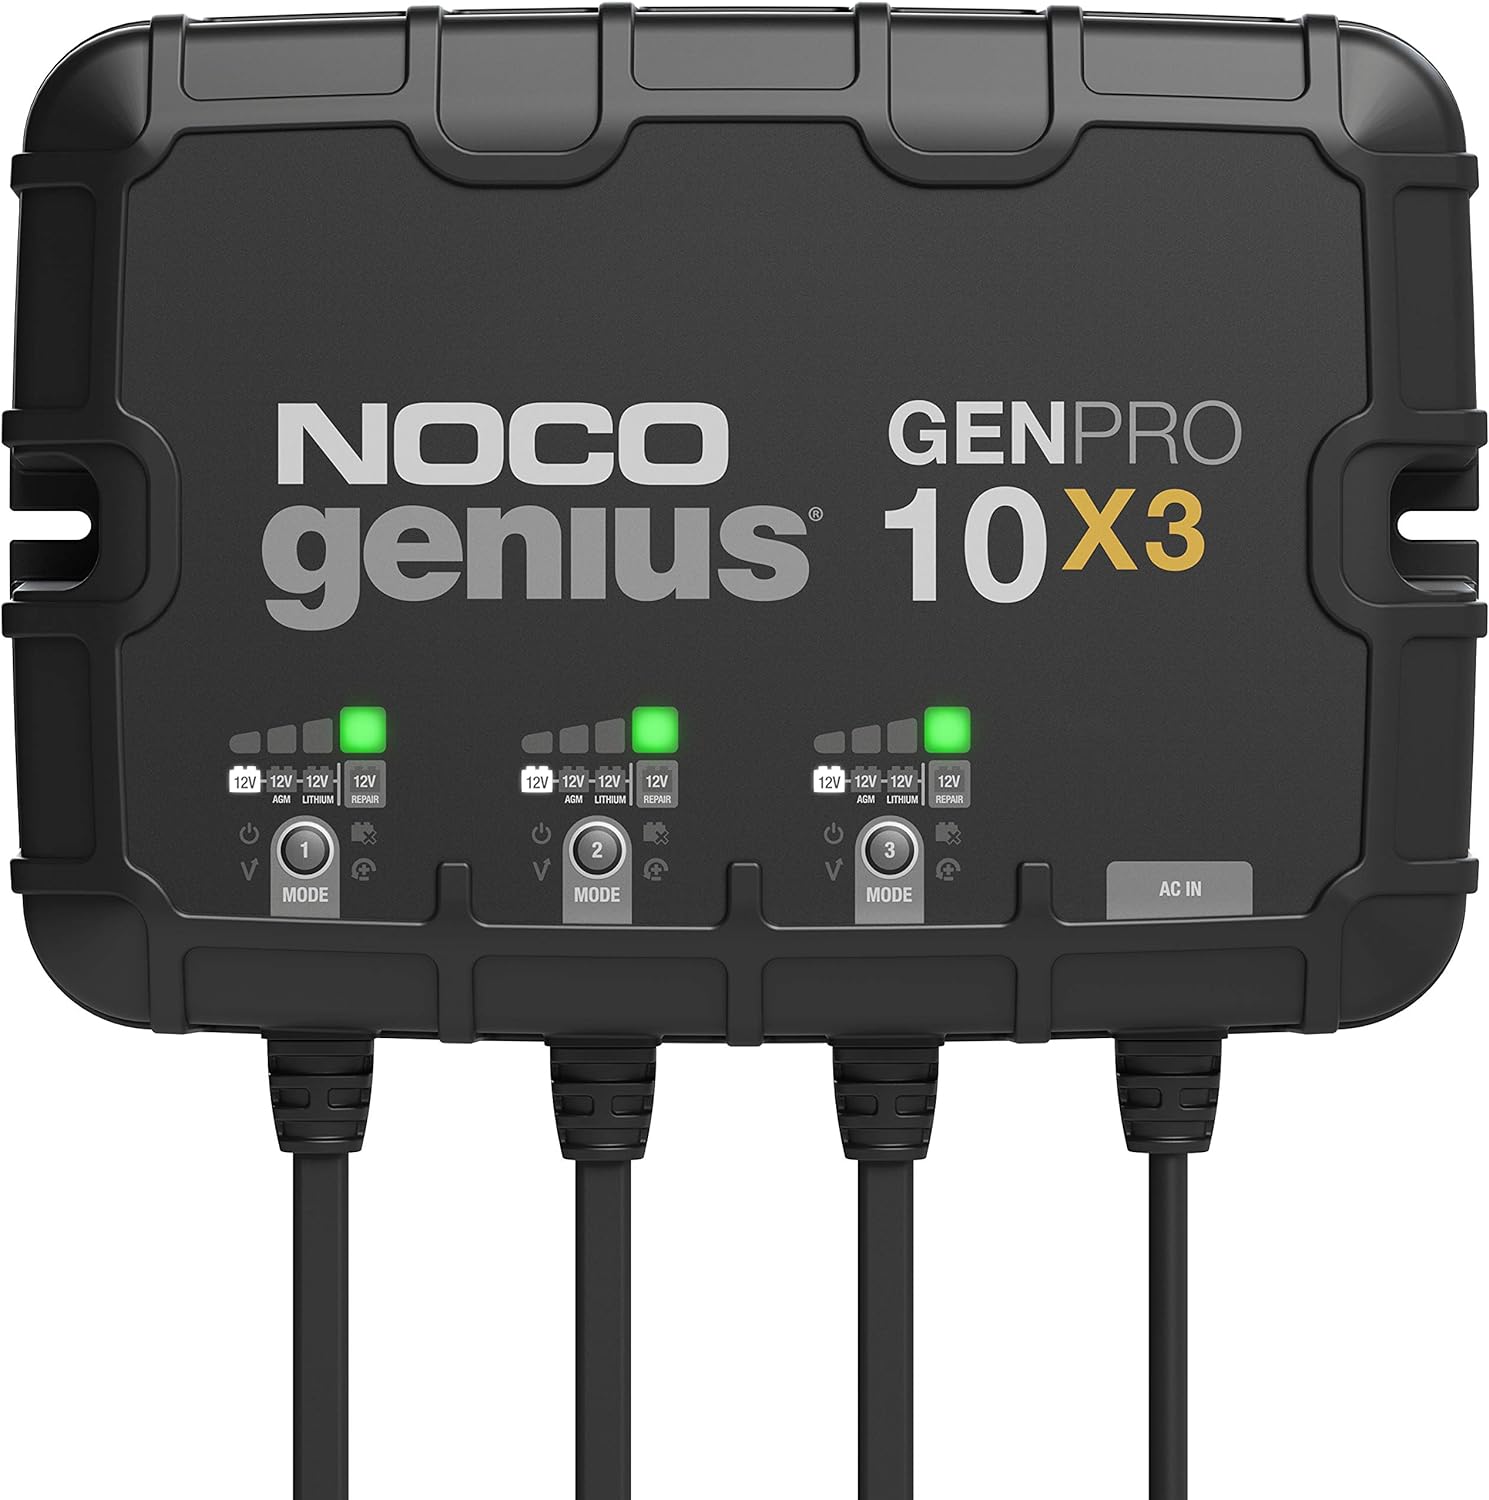 NOCO GENPRO10X3 30A Battery Charger Review